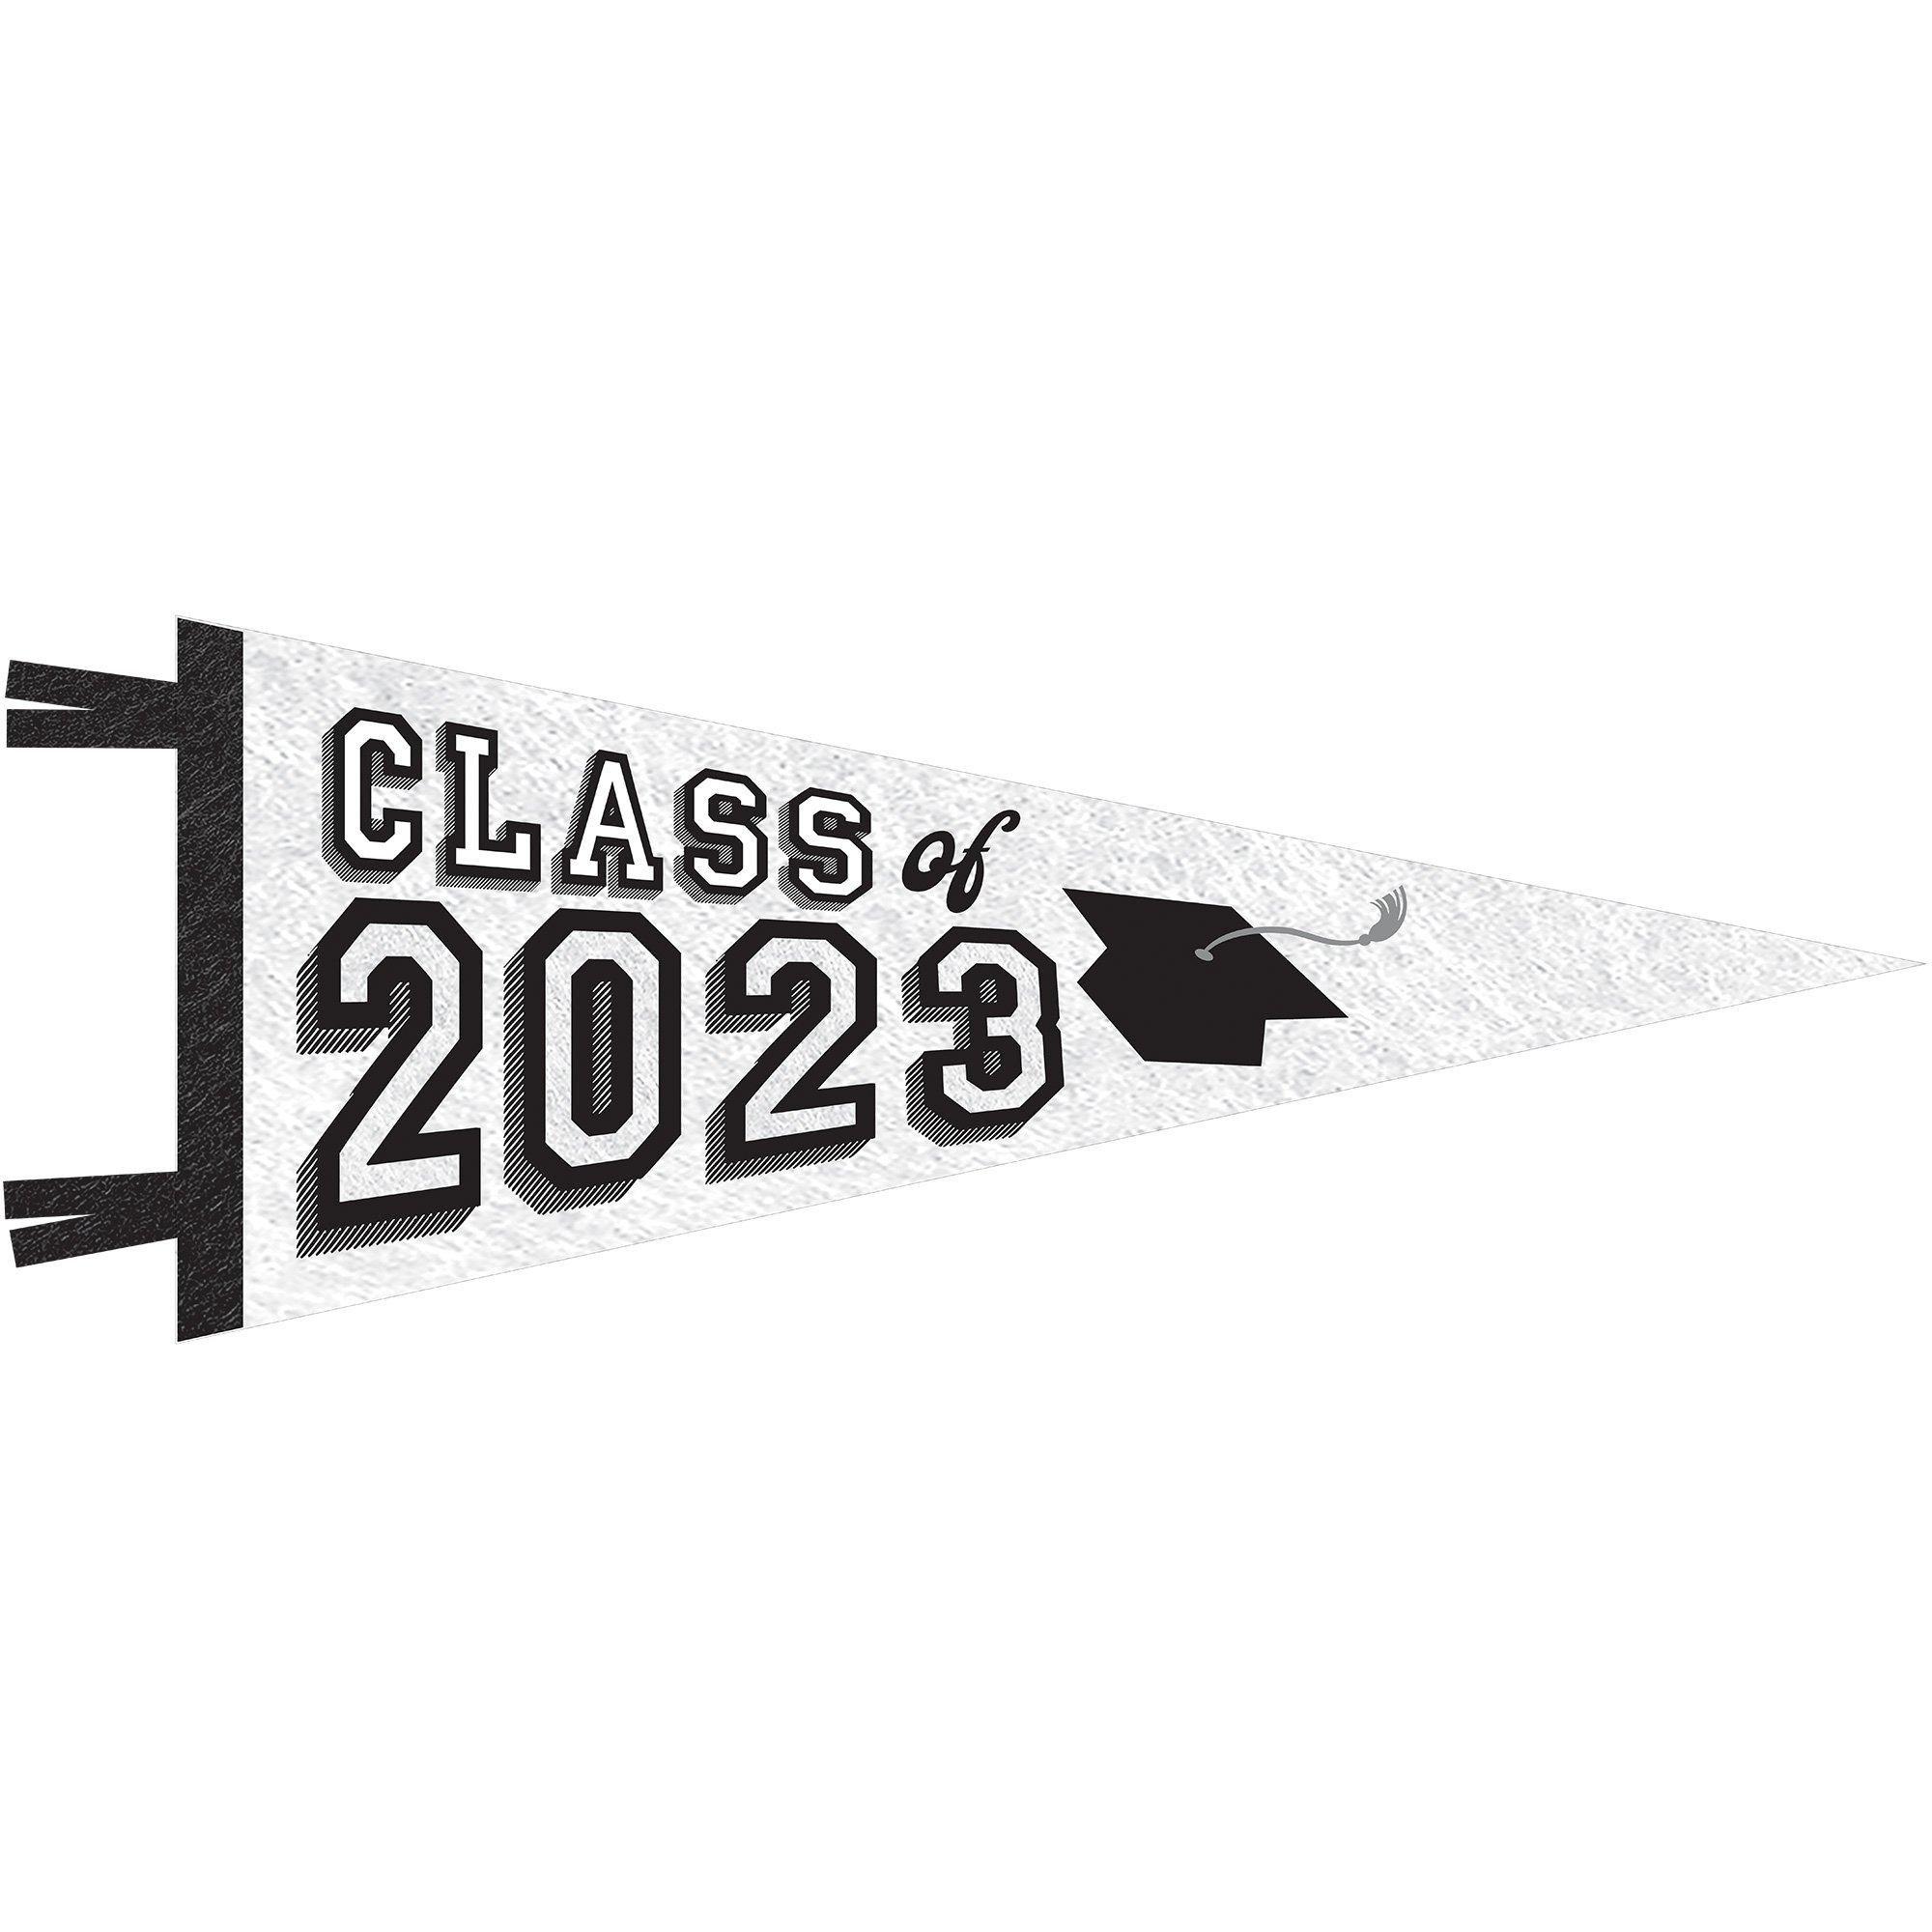 Graduation Party Decorations Kit with Banners, Balloons, Centerpiece, Streamers - Purple 2024 Congrats Grad